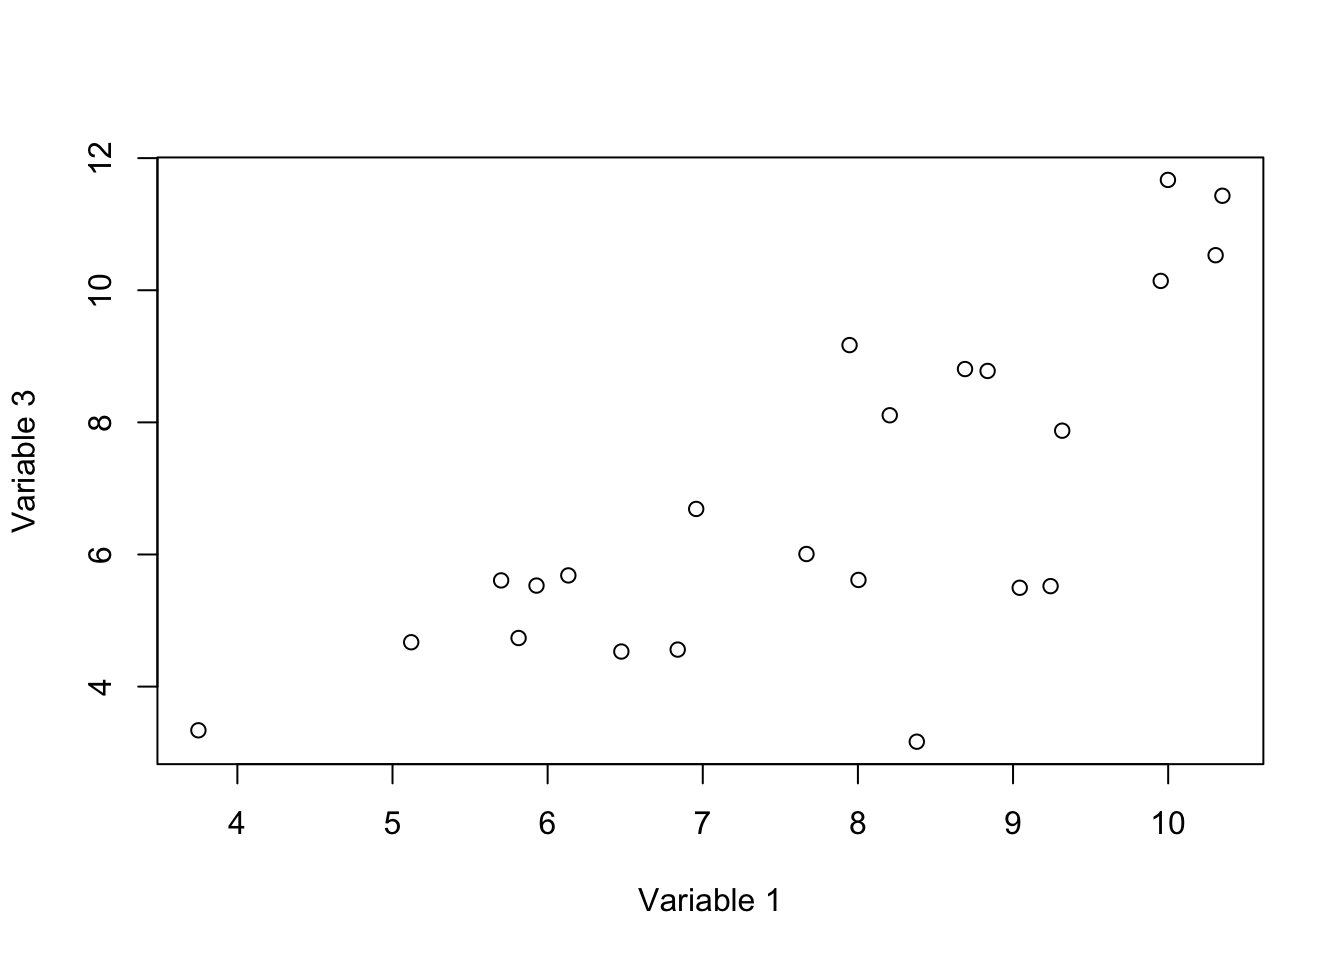 Here, we select two variables and show how the data is spread according to the variables.